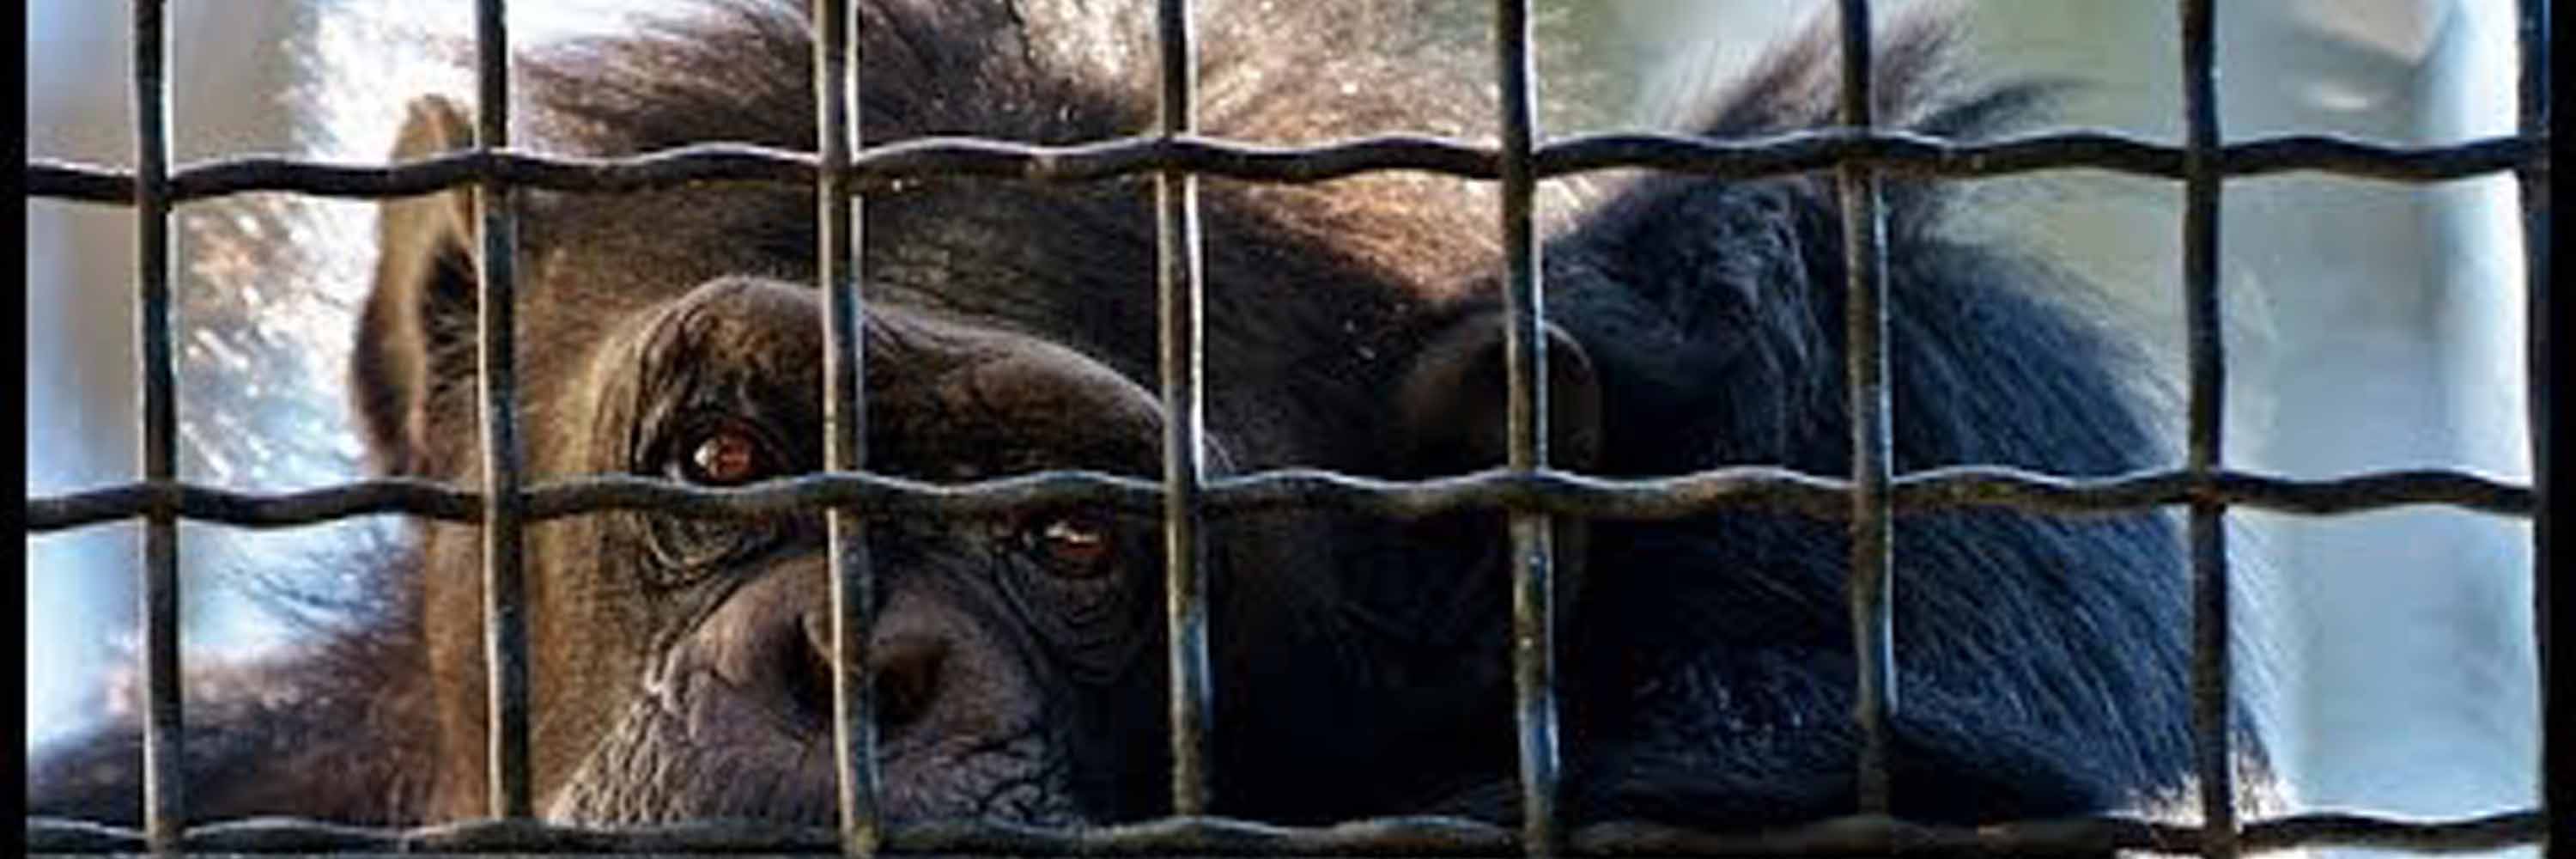 a sad monkey looking through the bars of a cage